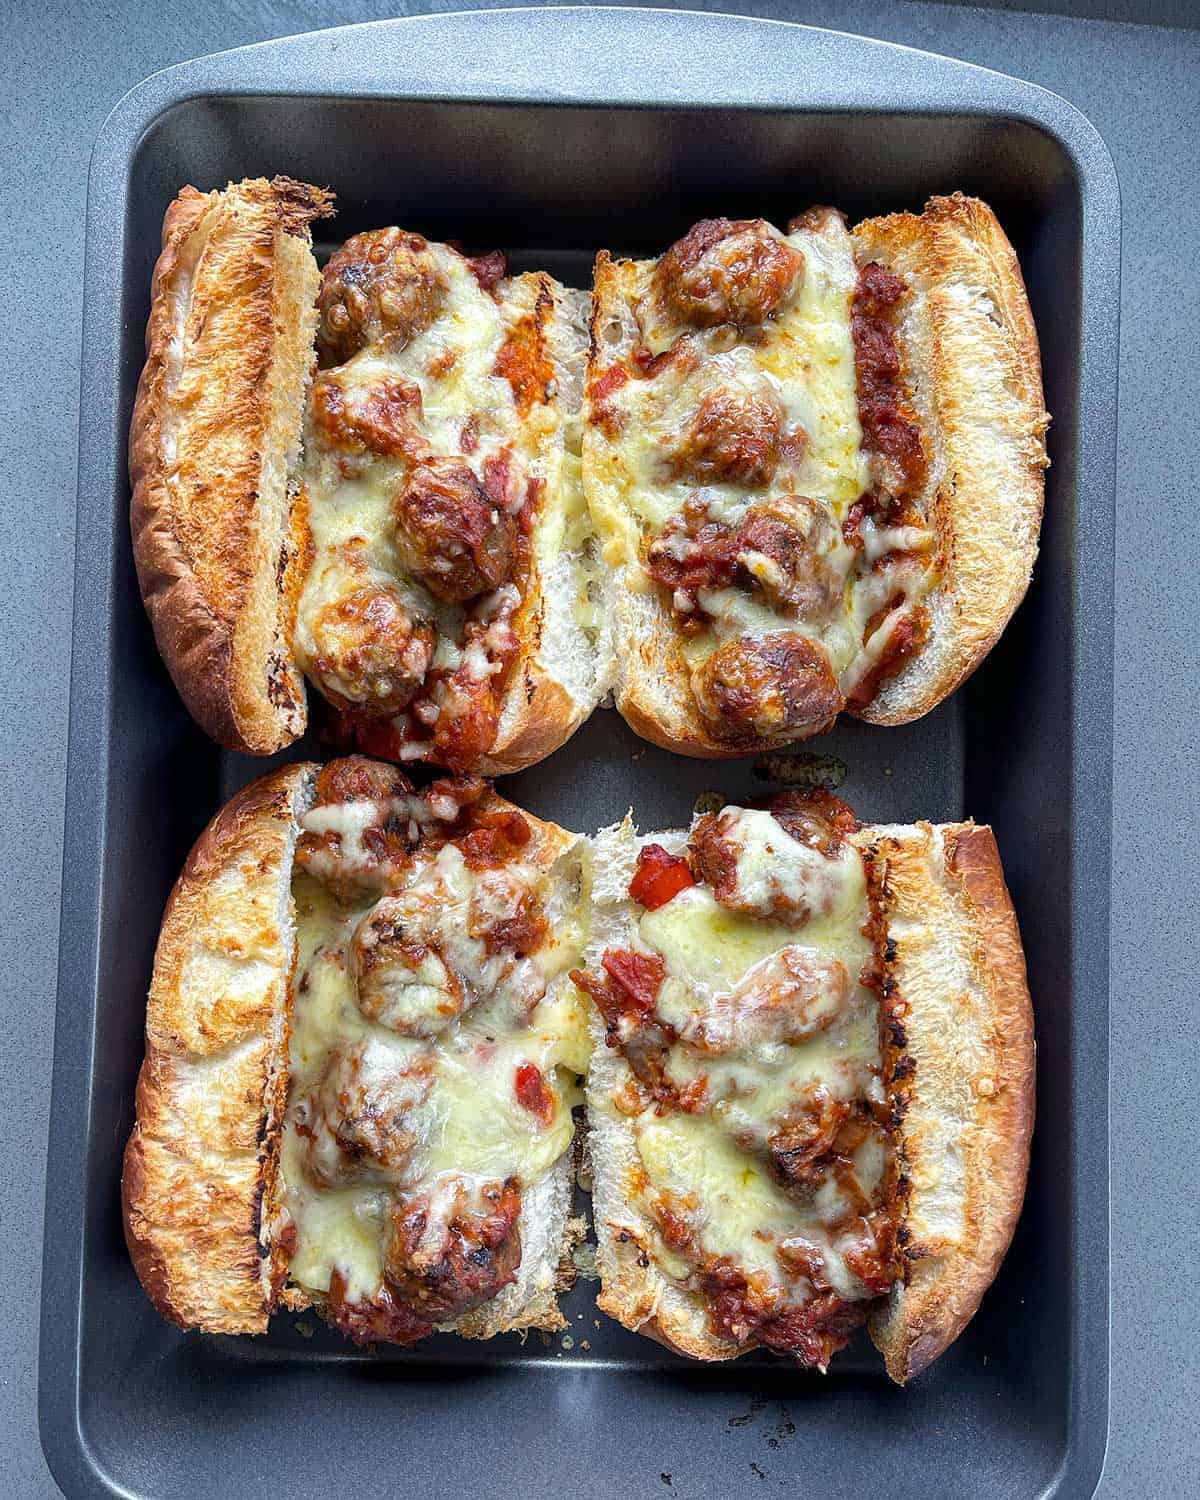 Cooked Meatball subs on a baking tray